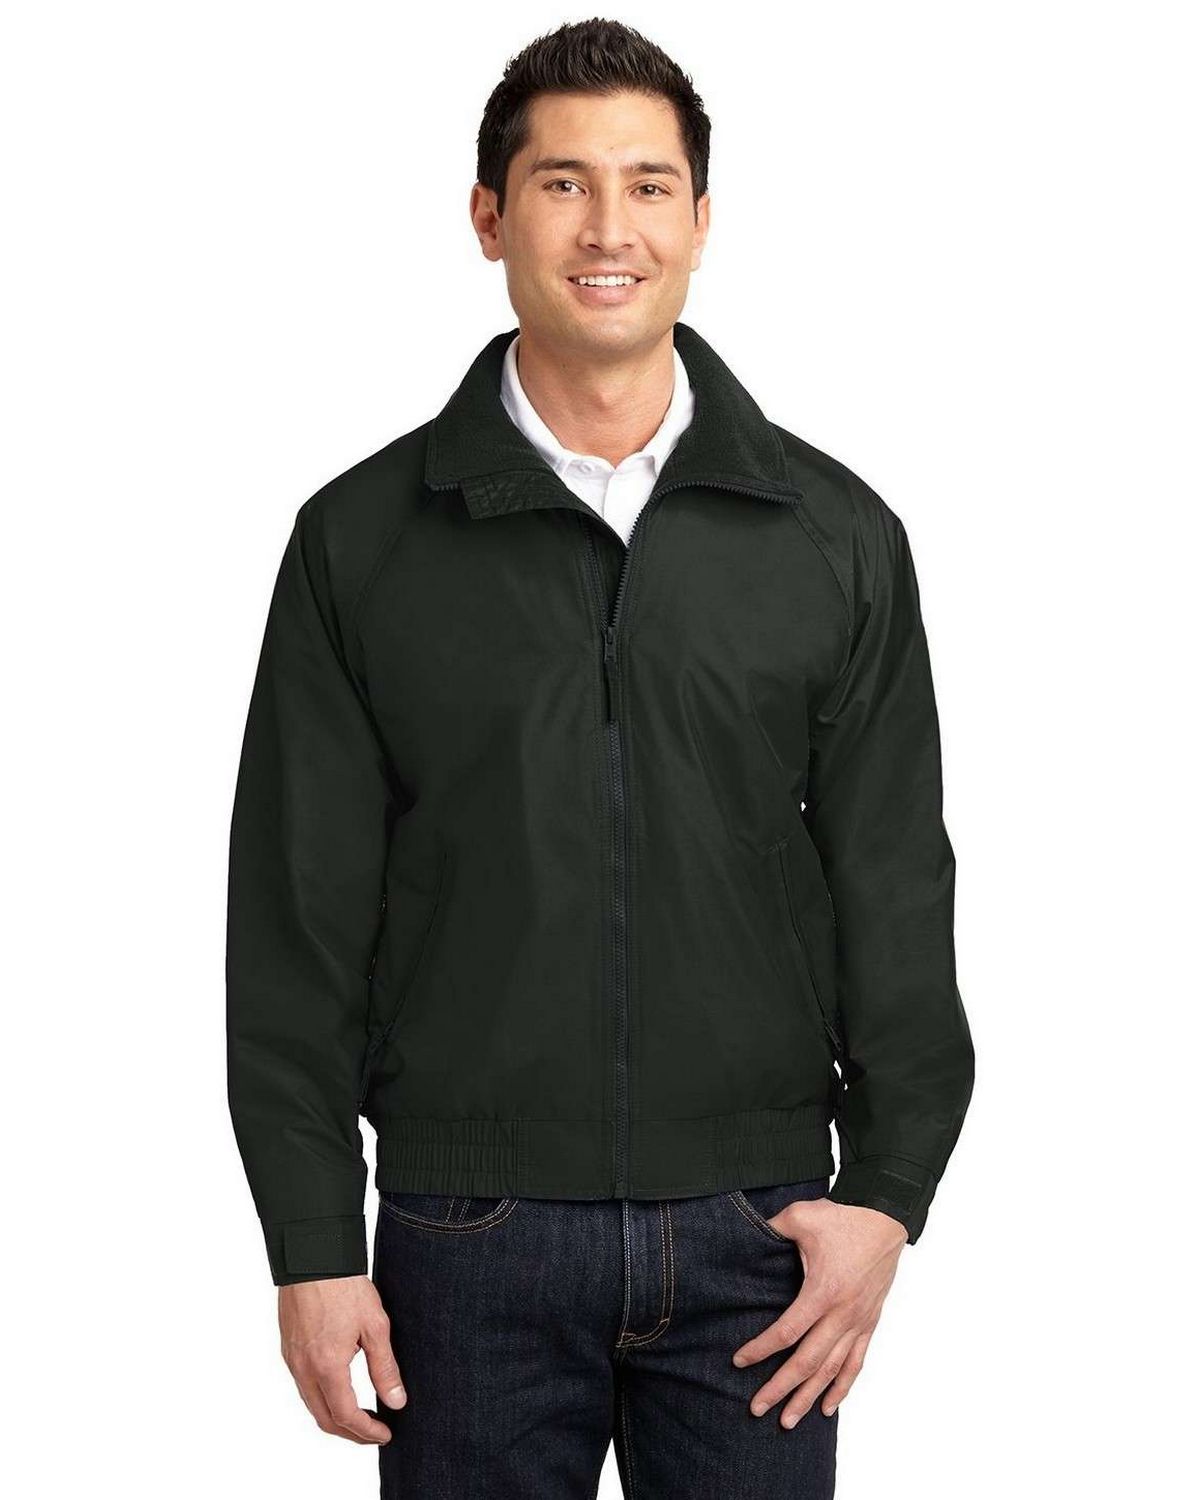 Port Authority JP54 Competitor Jacket - Shop at ApparelnBags.com